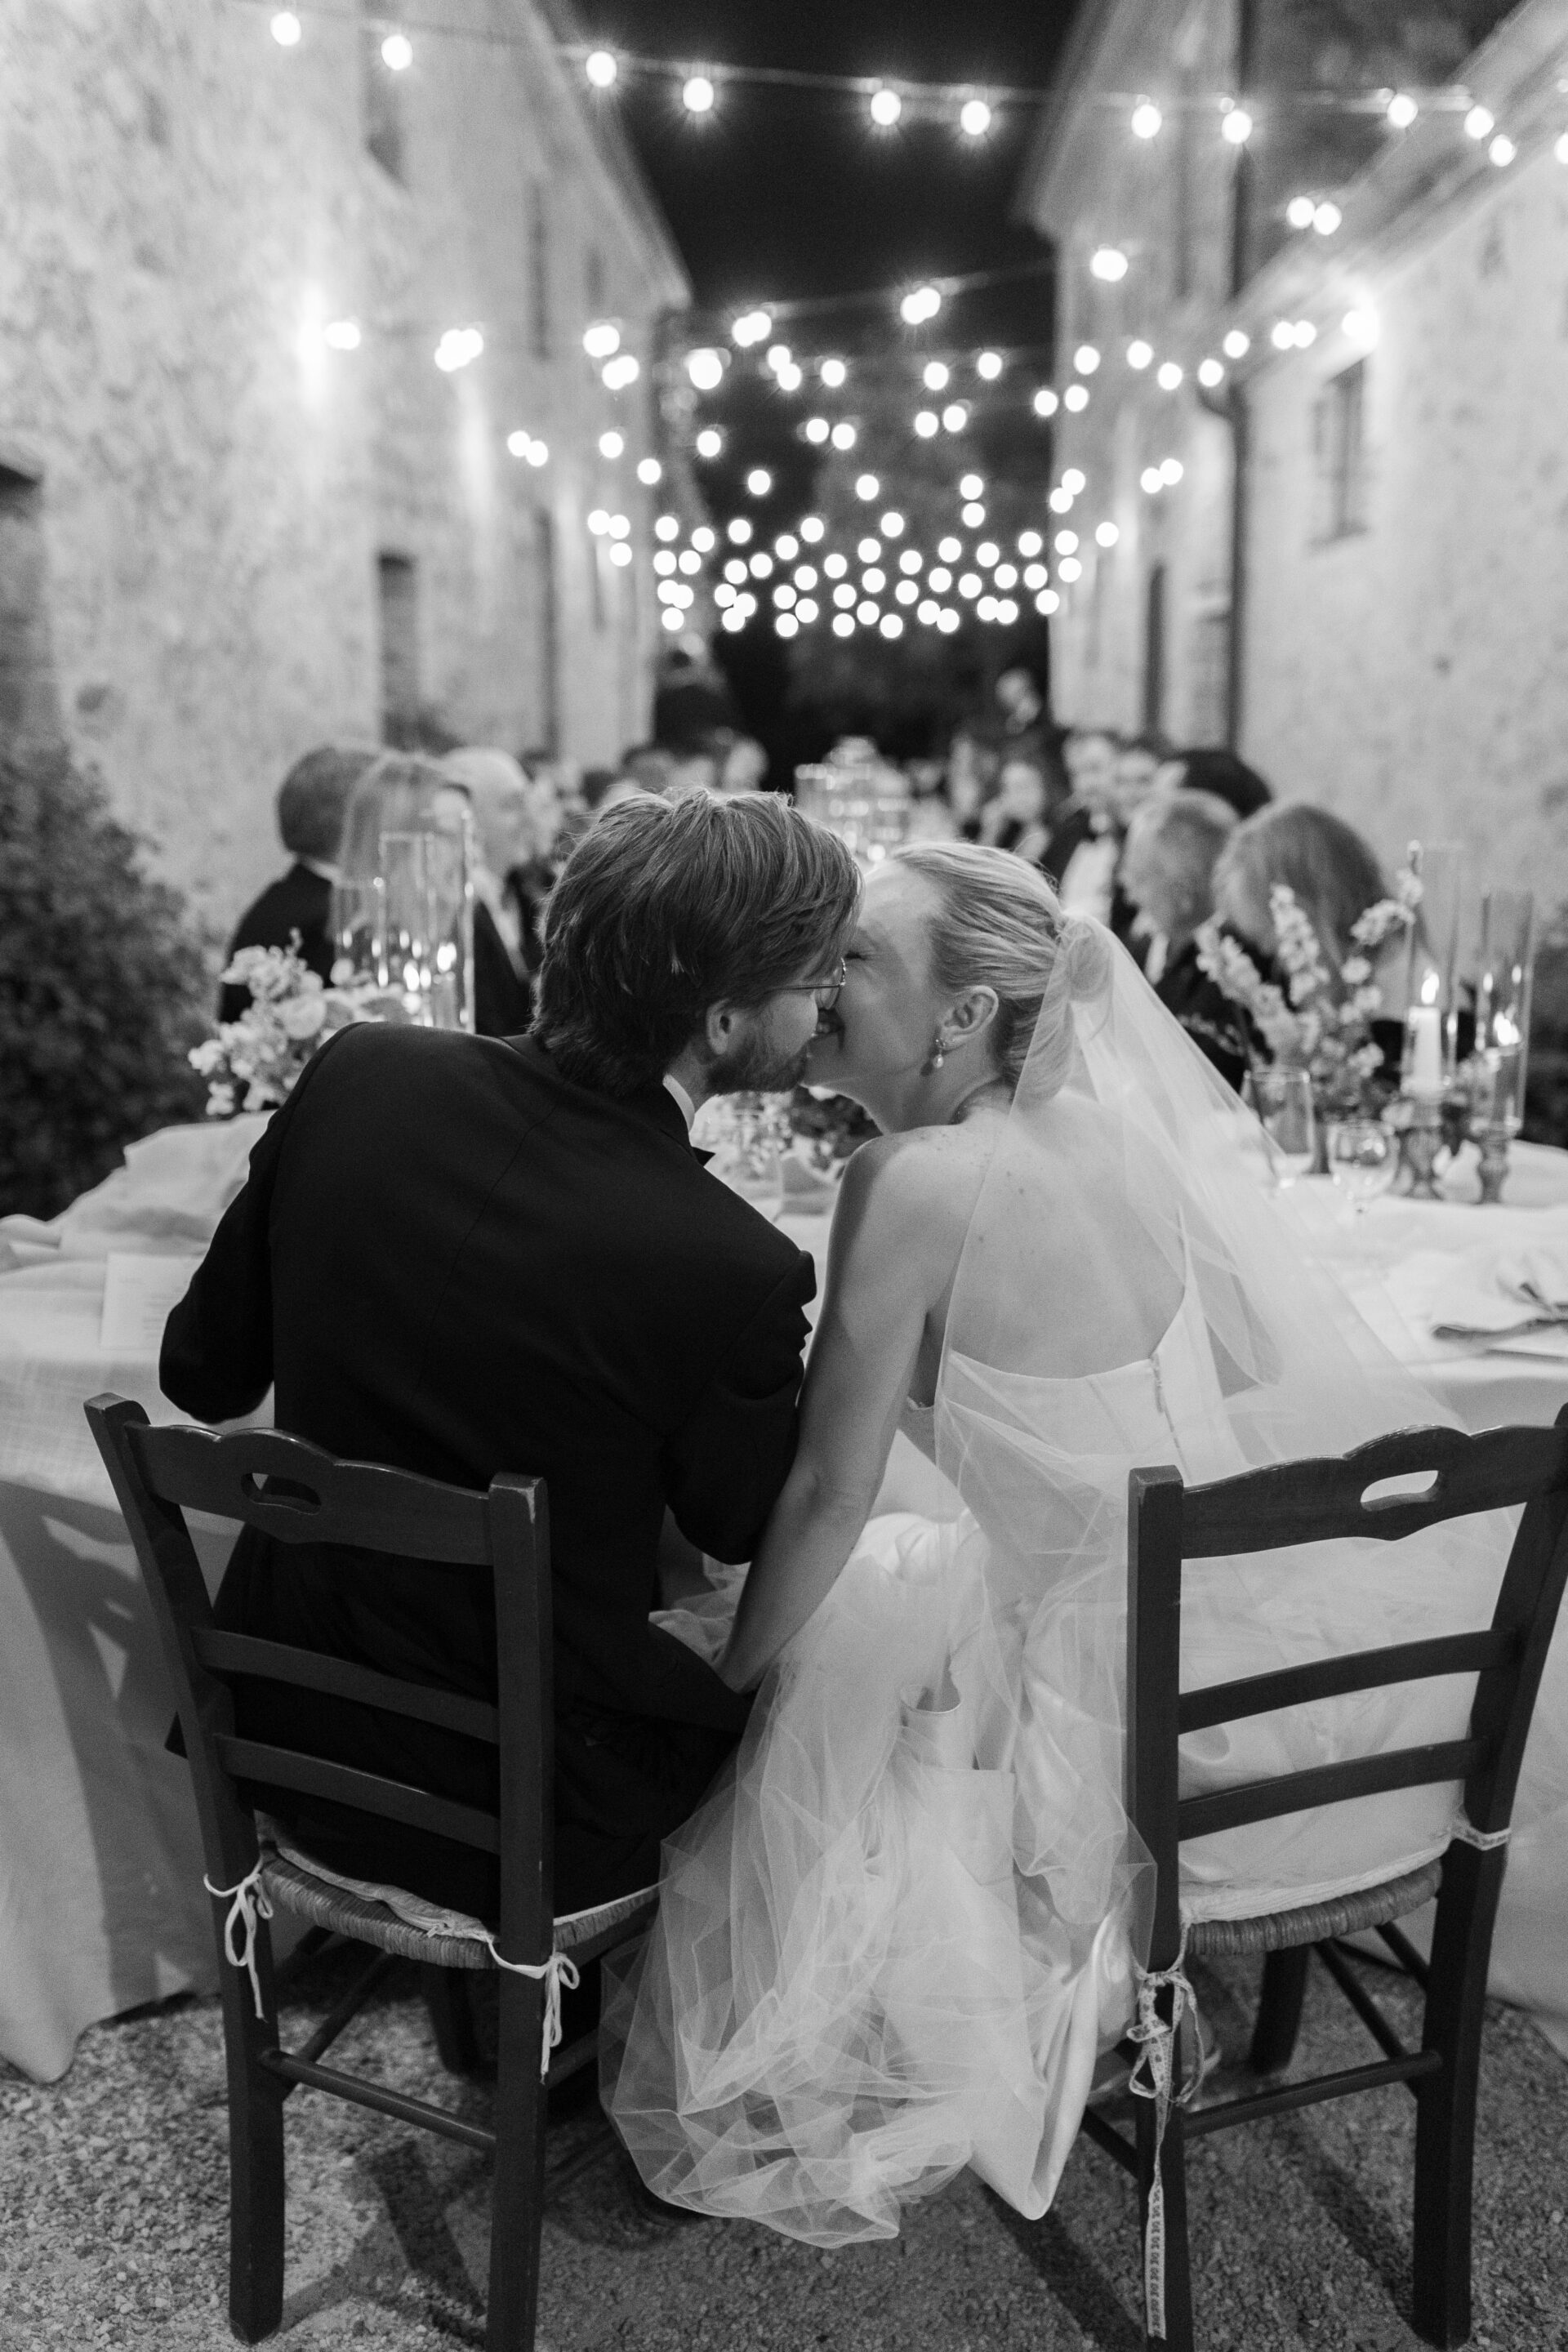 The bride and groom share a kiss at their Italian wedding